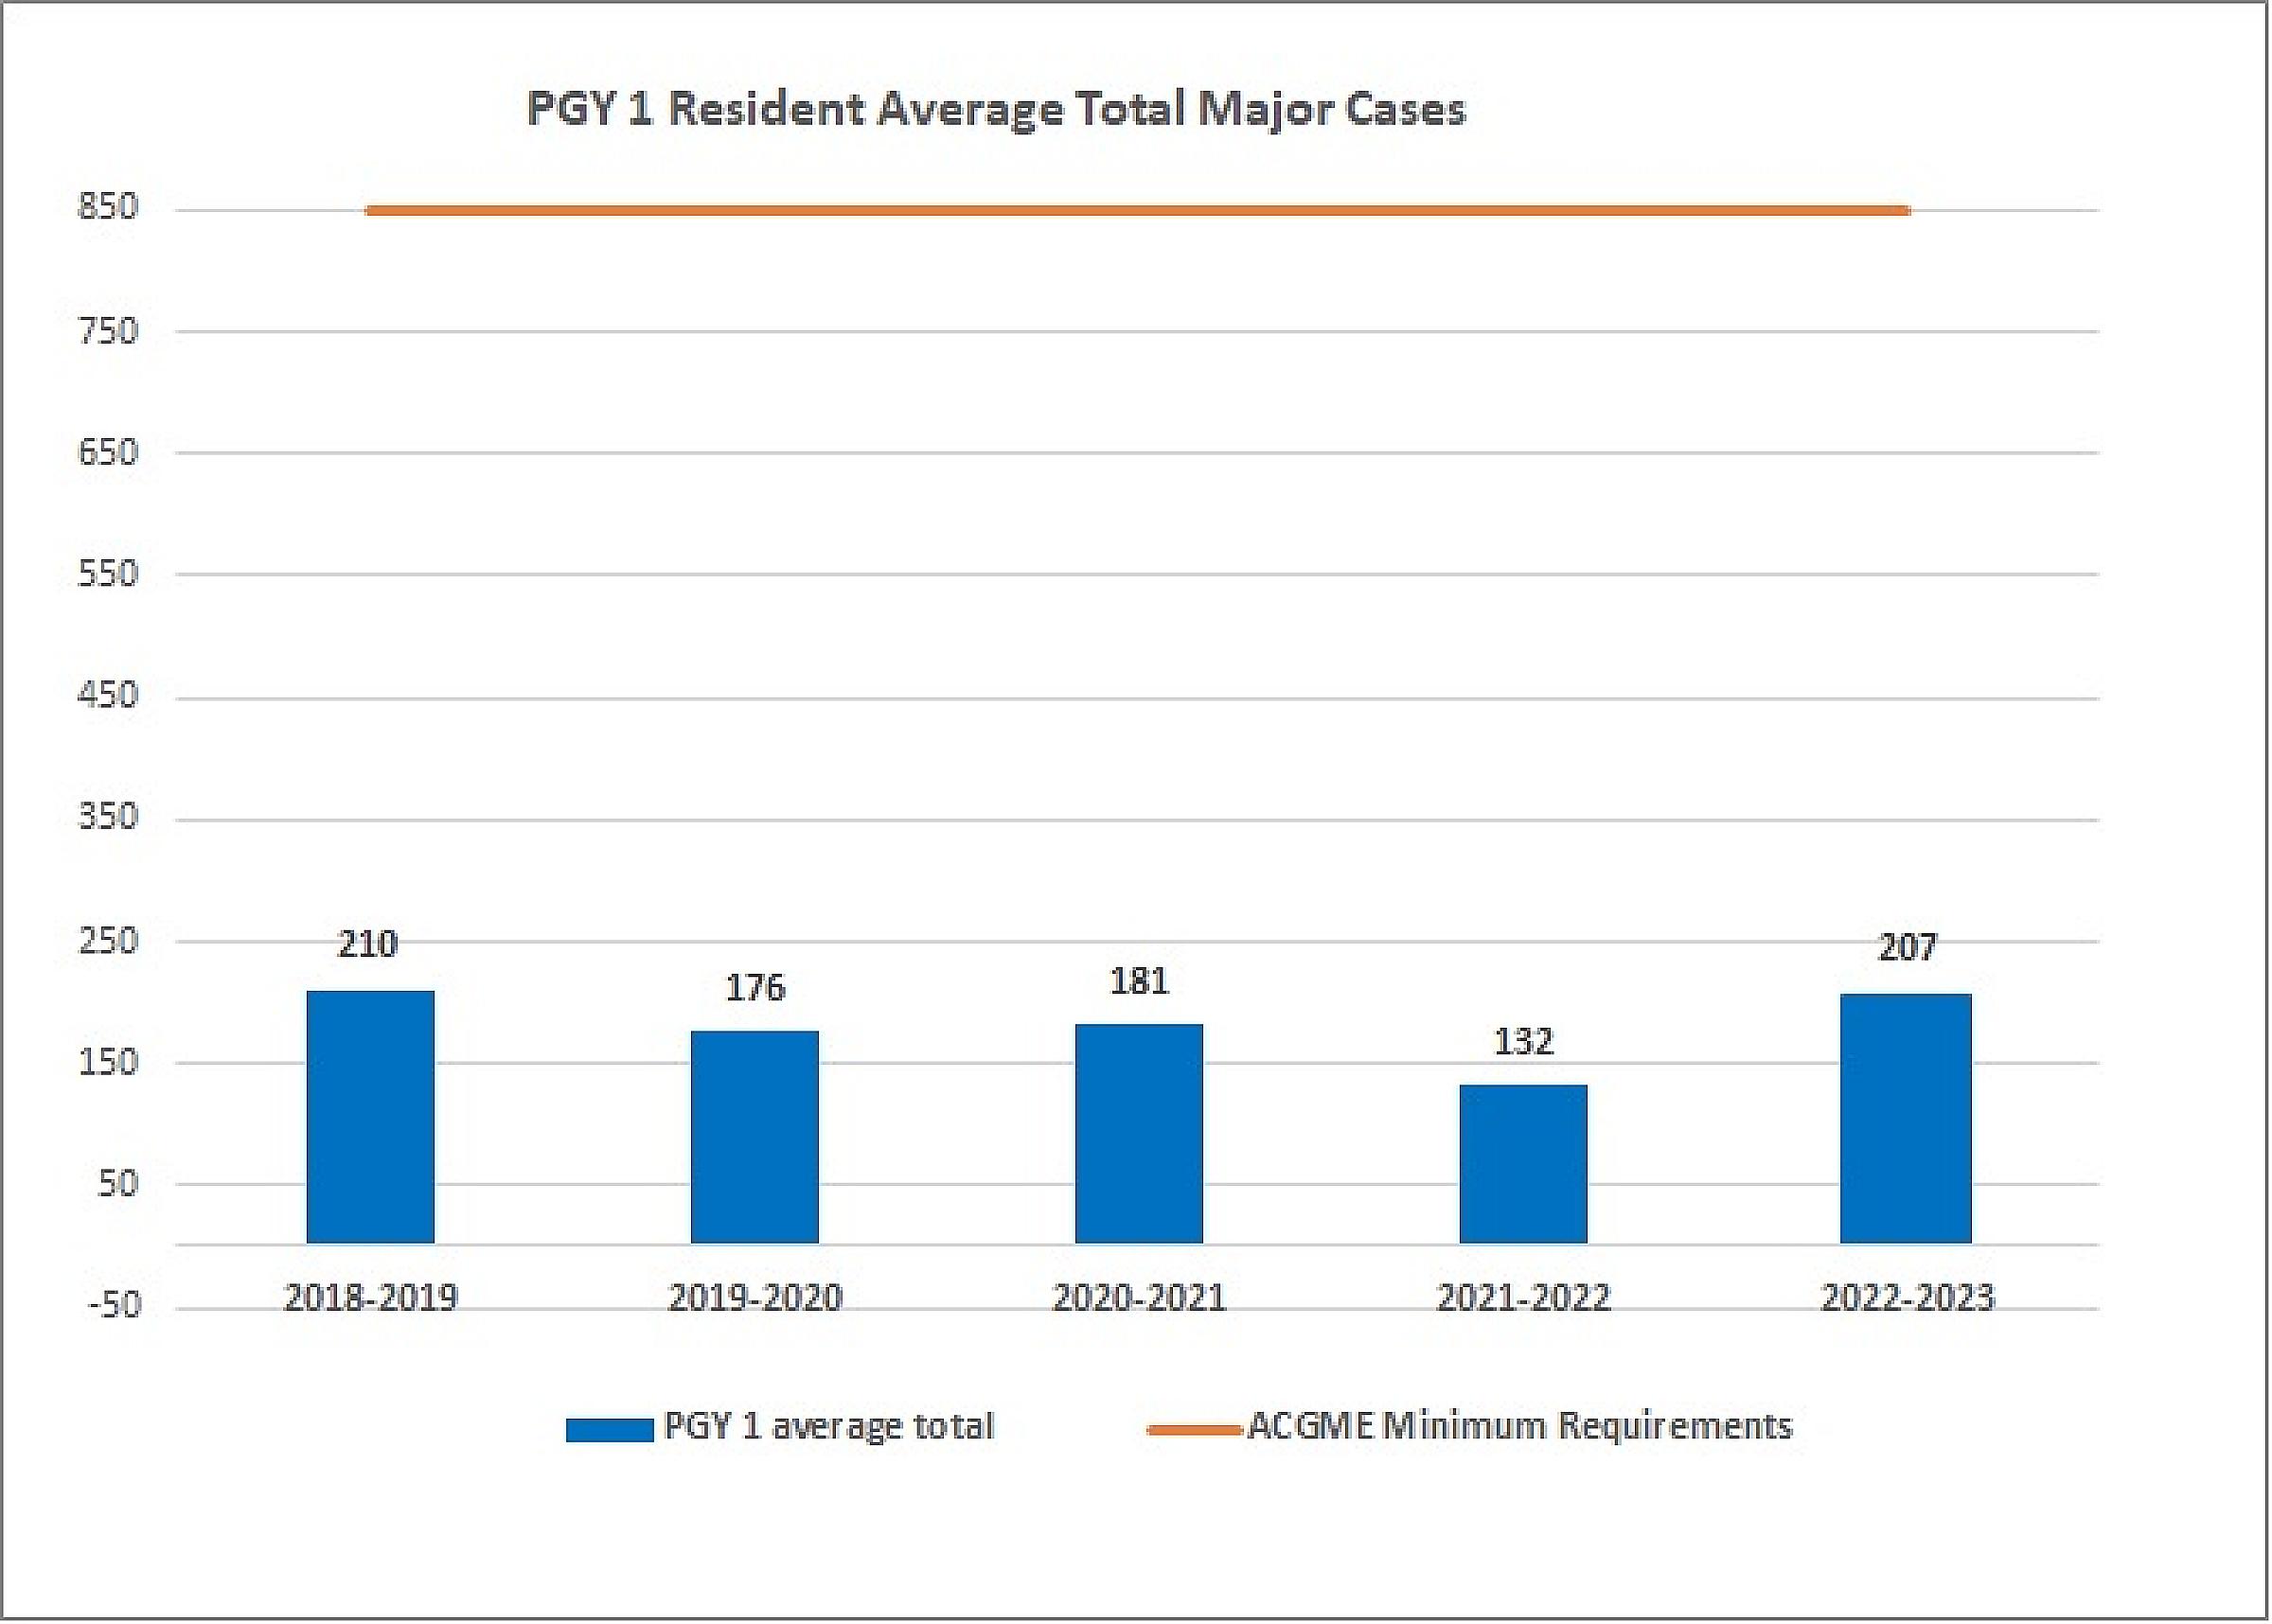 PGY 1 Total Cases for 5 Years